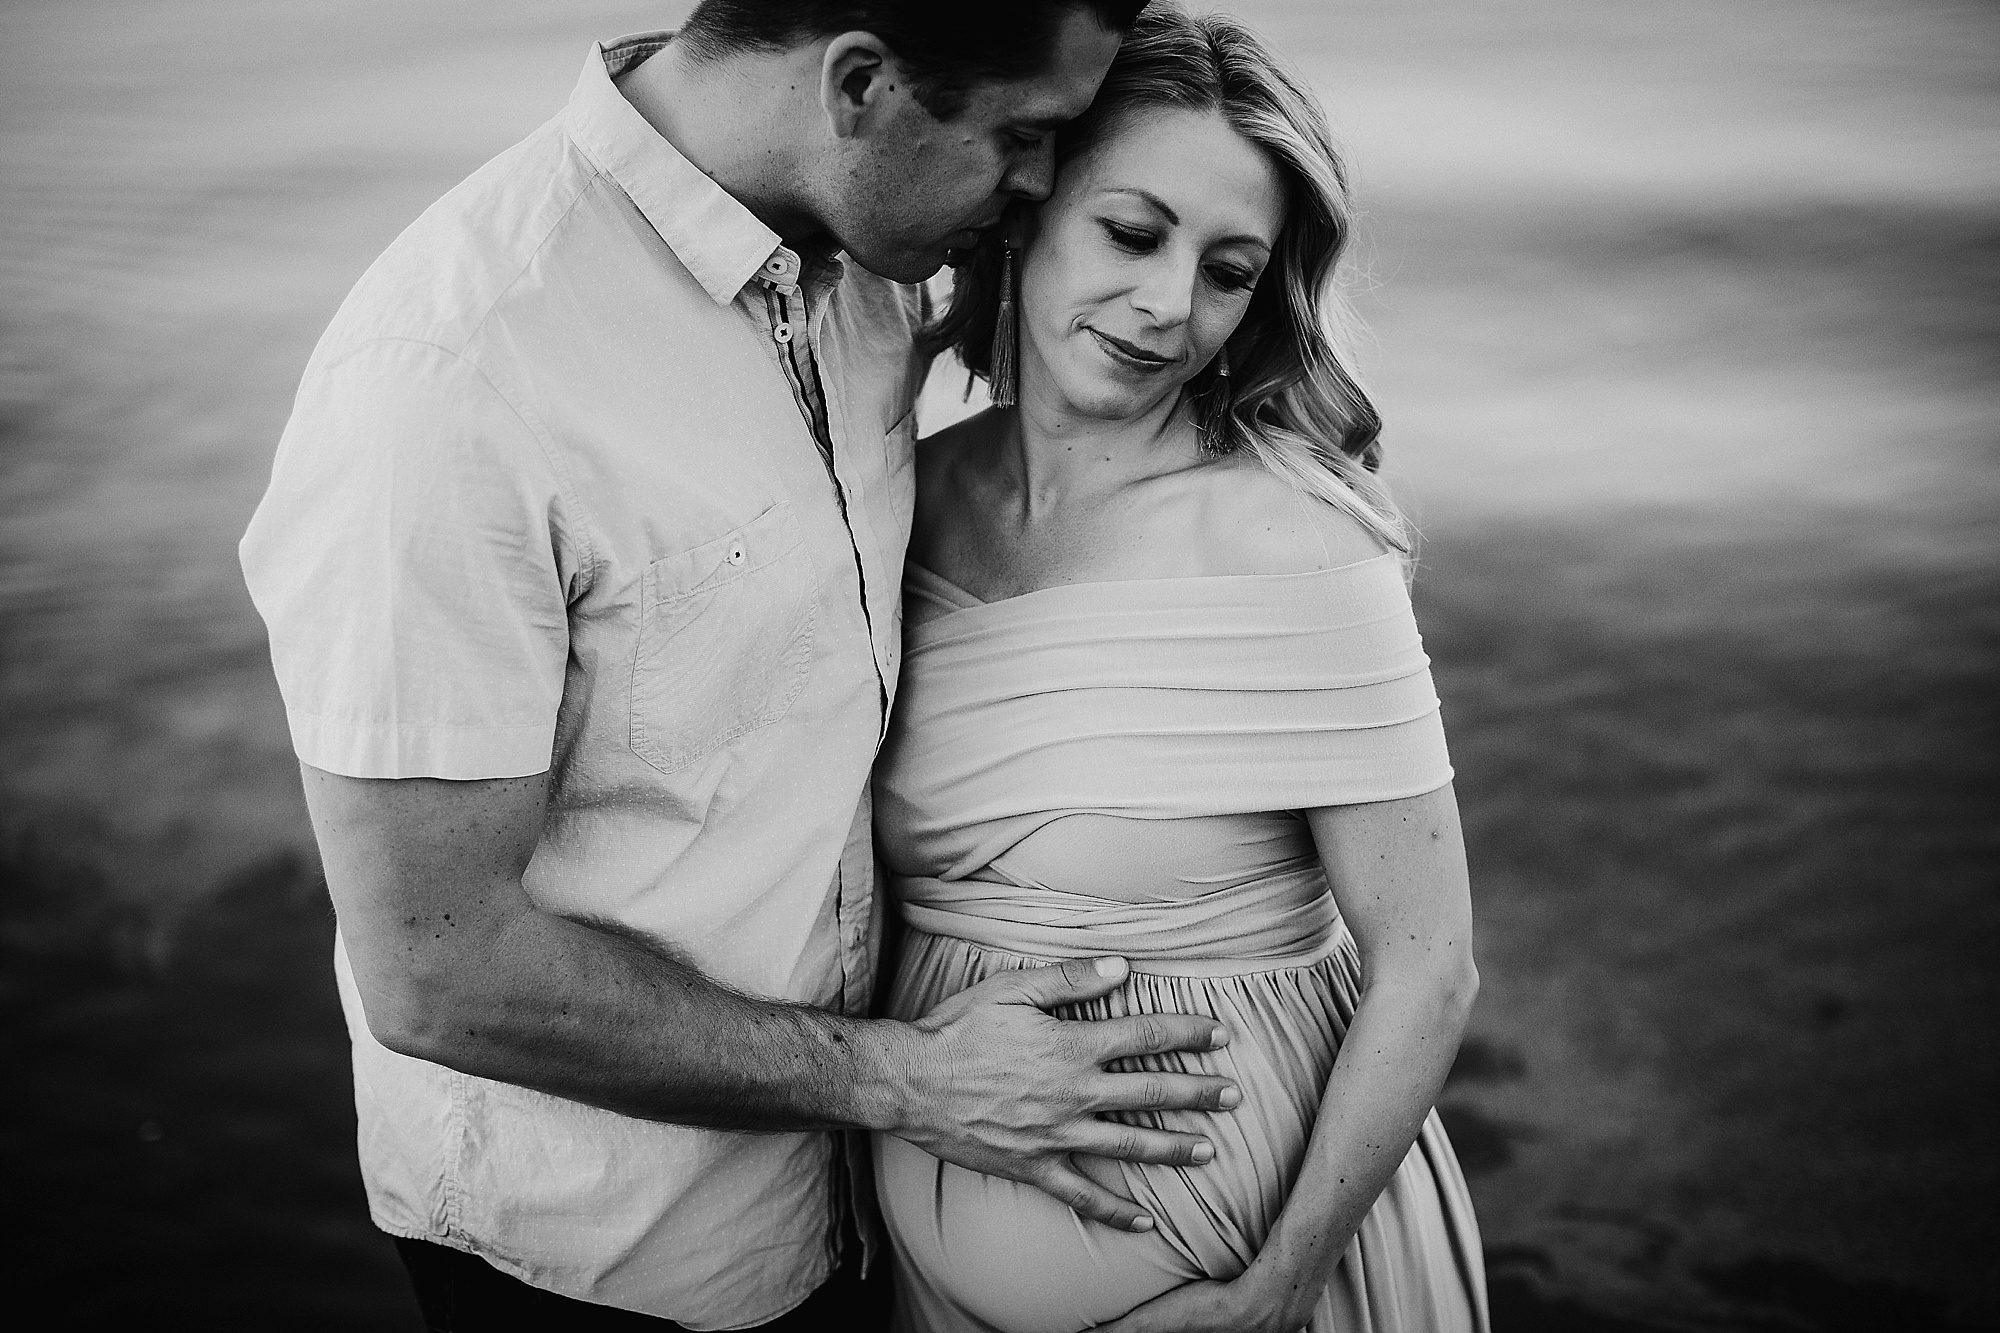 water maternity couple poses, maternity pictures with dog, Maryland Maternity Photography, Organic Maternity Pictures, Couple maternity, Maternity pictures with a dog